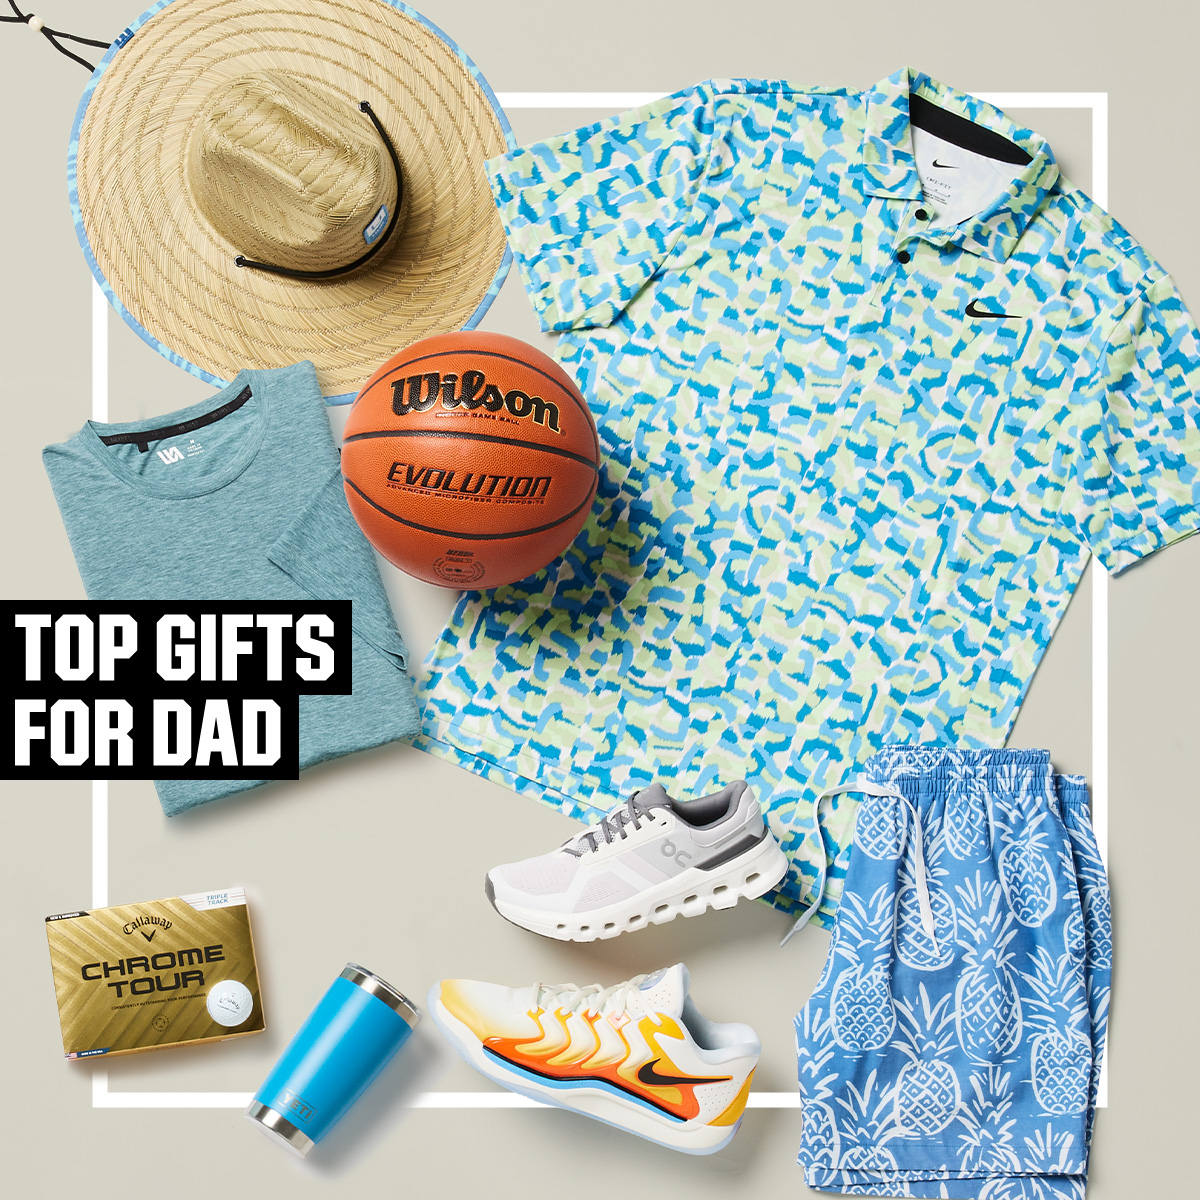  Top gifts for dad.